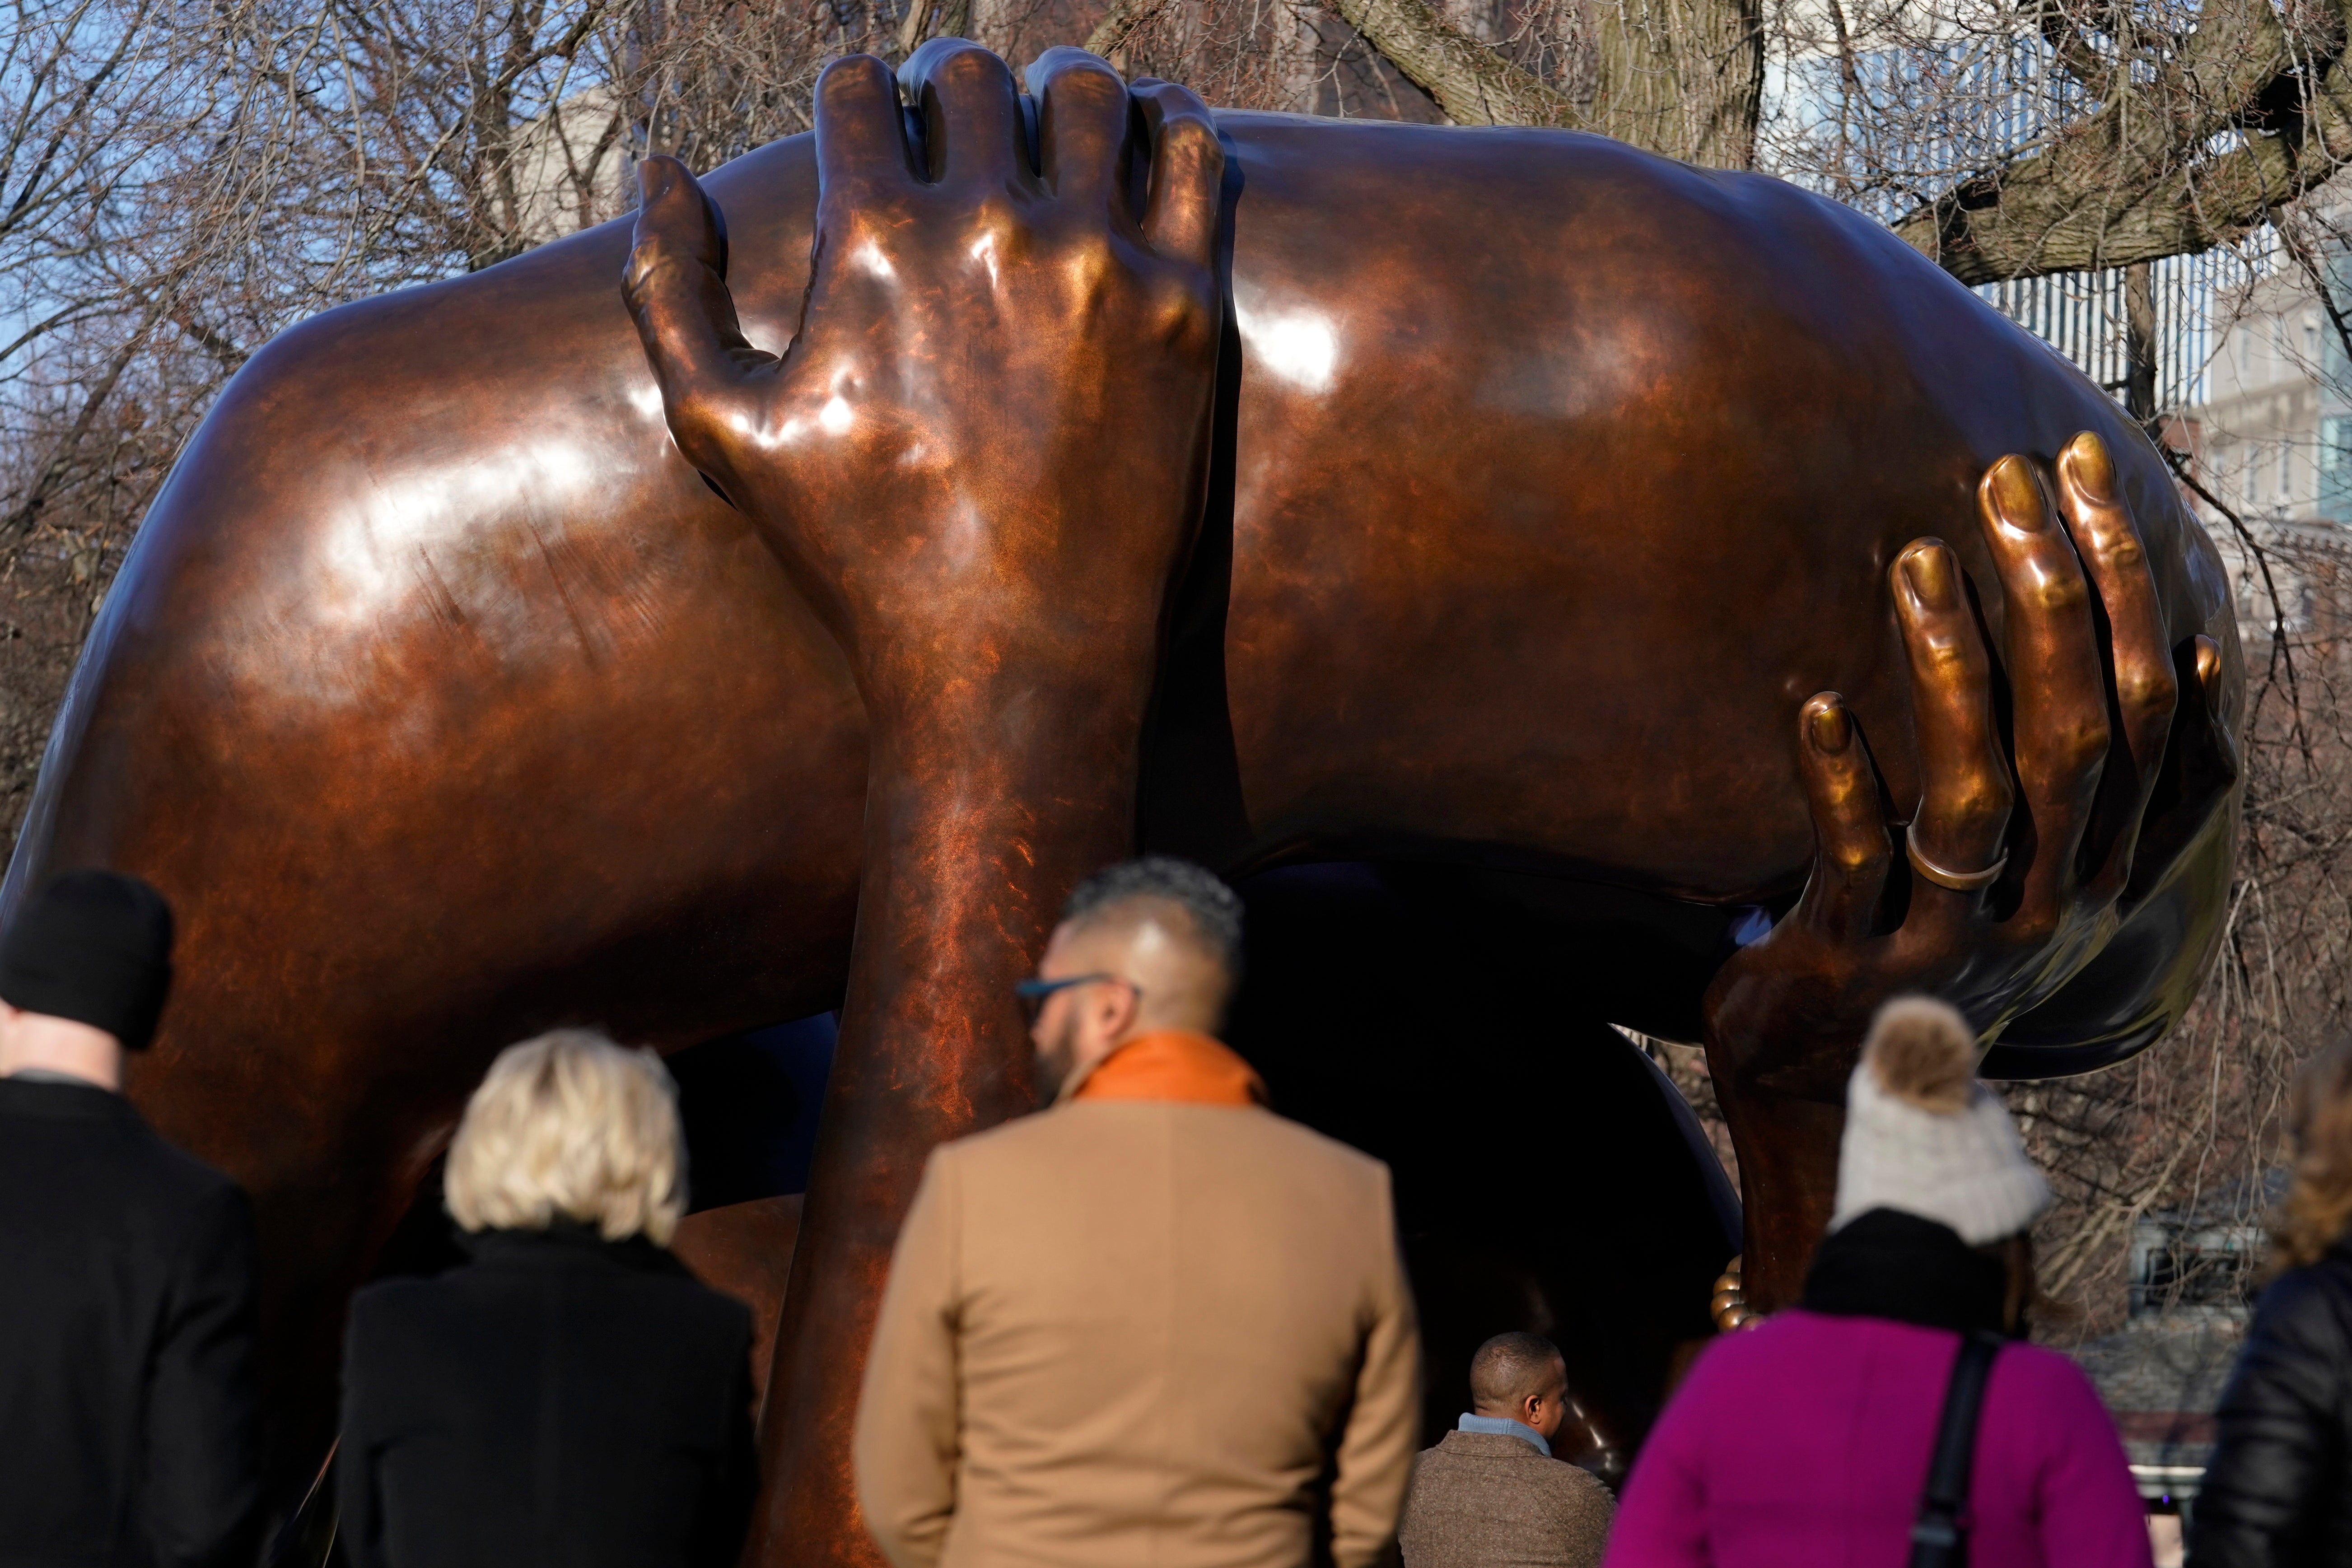 A 20-foot-high bronze sculpture ‘The Embrace,’ a memorial to Dr. Martin Luther King Jr. and Coretta King, has been derided online